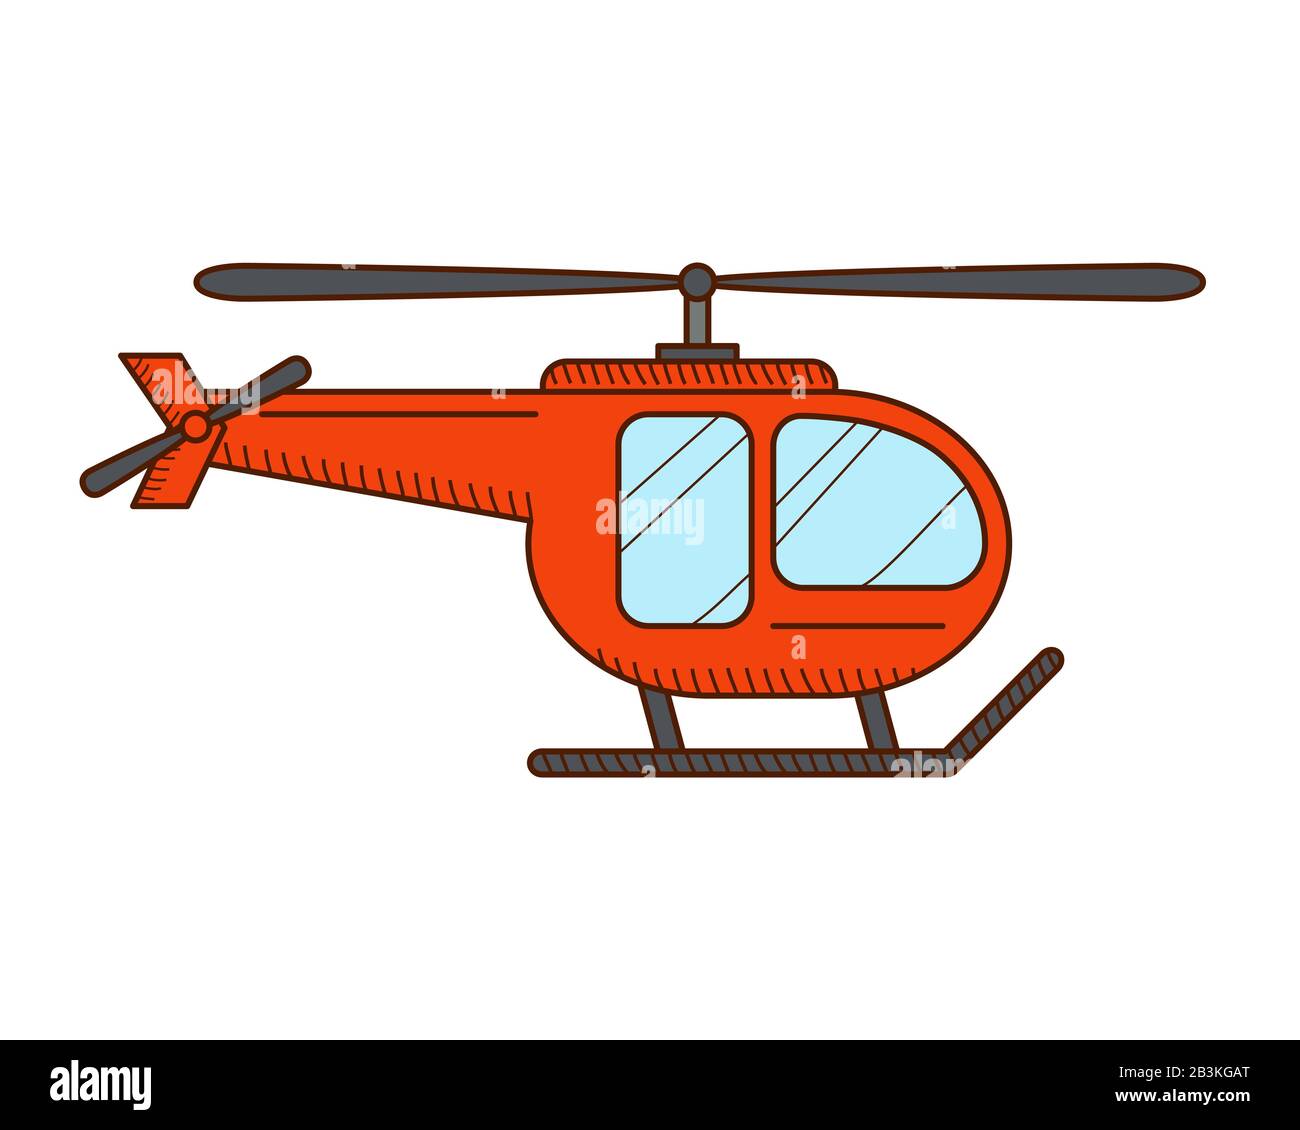 Helicopter Coloring Page Vehicle Illustration Stock Vector Image ...